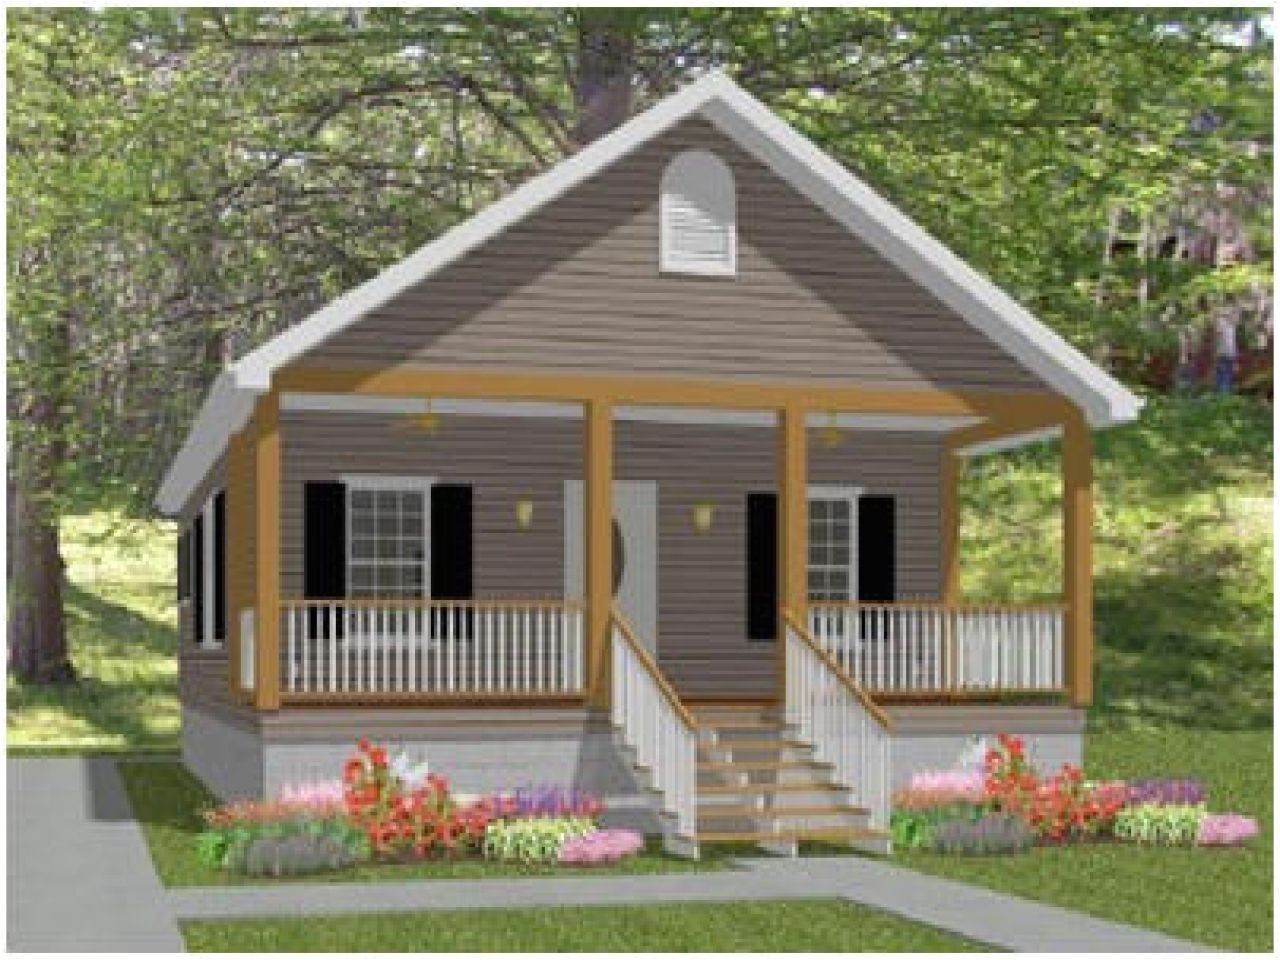 House Plans for Cabins and Small Houses Small Cottage House Plans with Porches 2018 House Plans